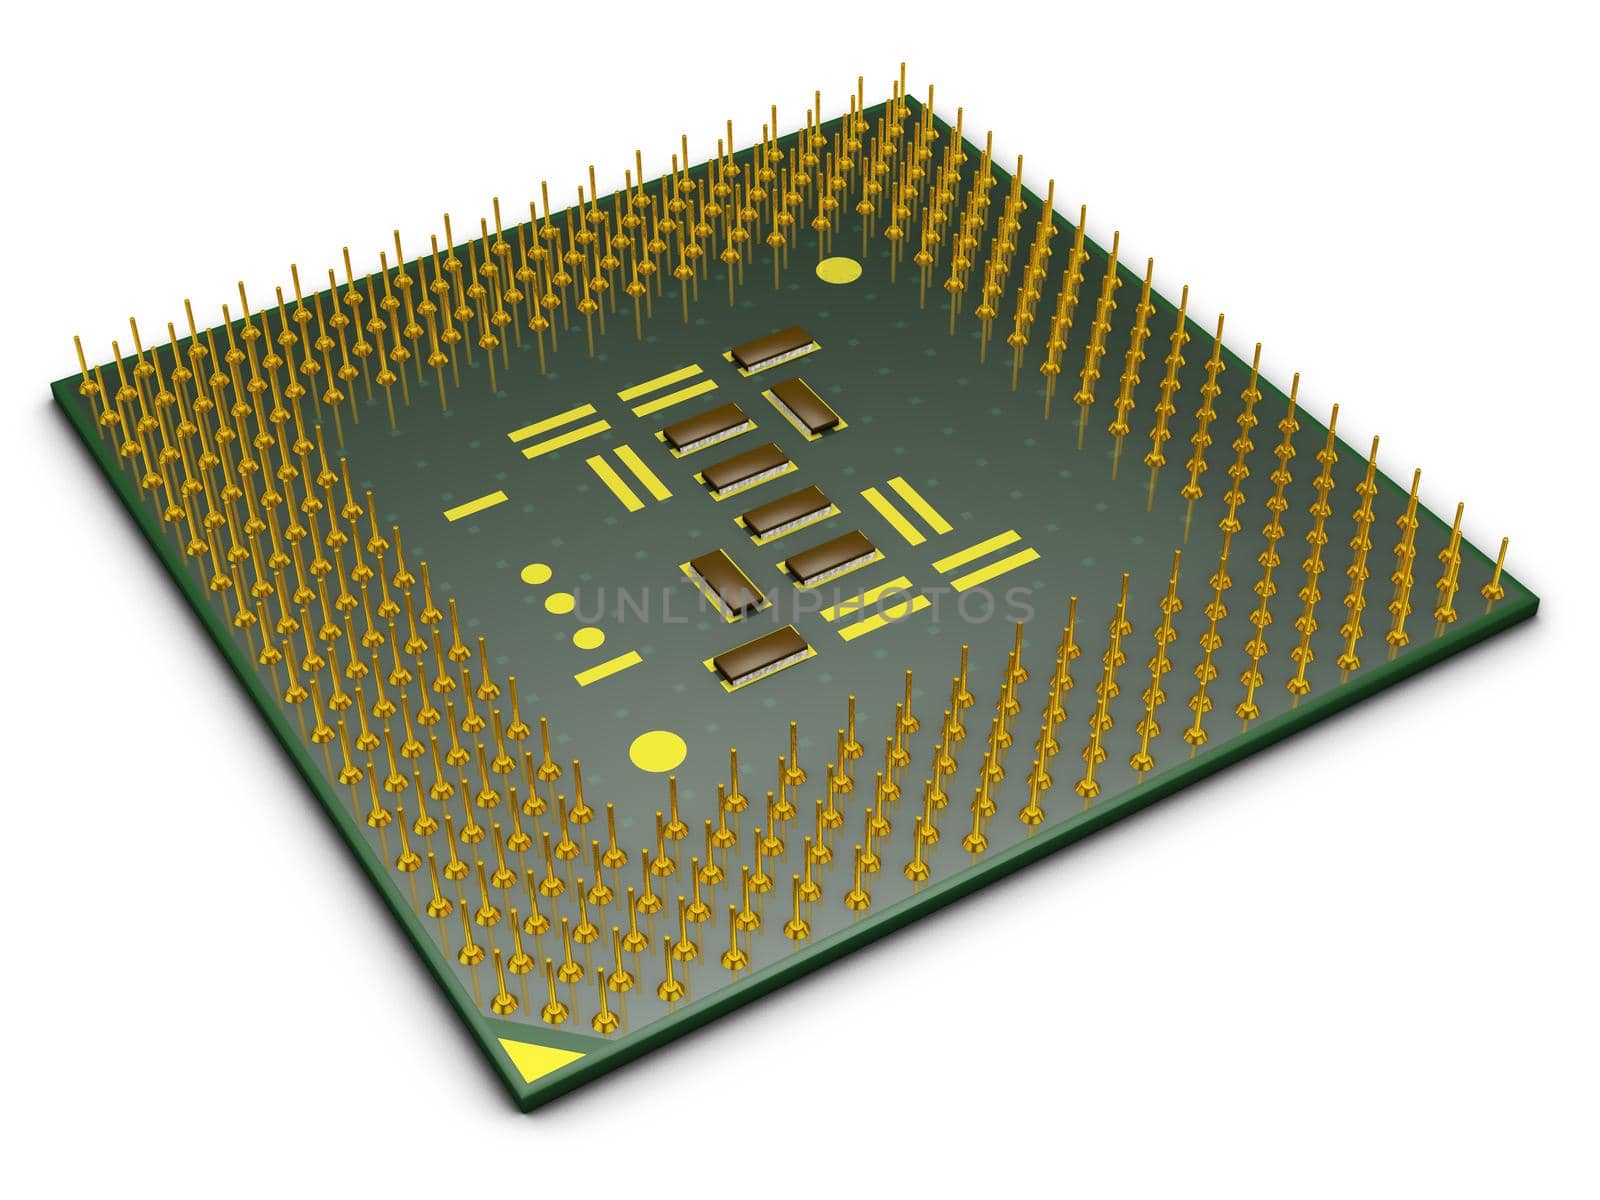 modern processor for computer on white background